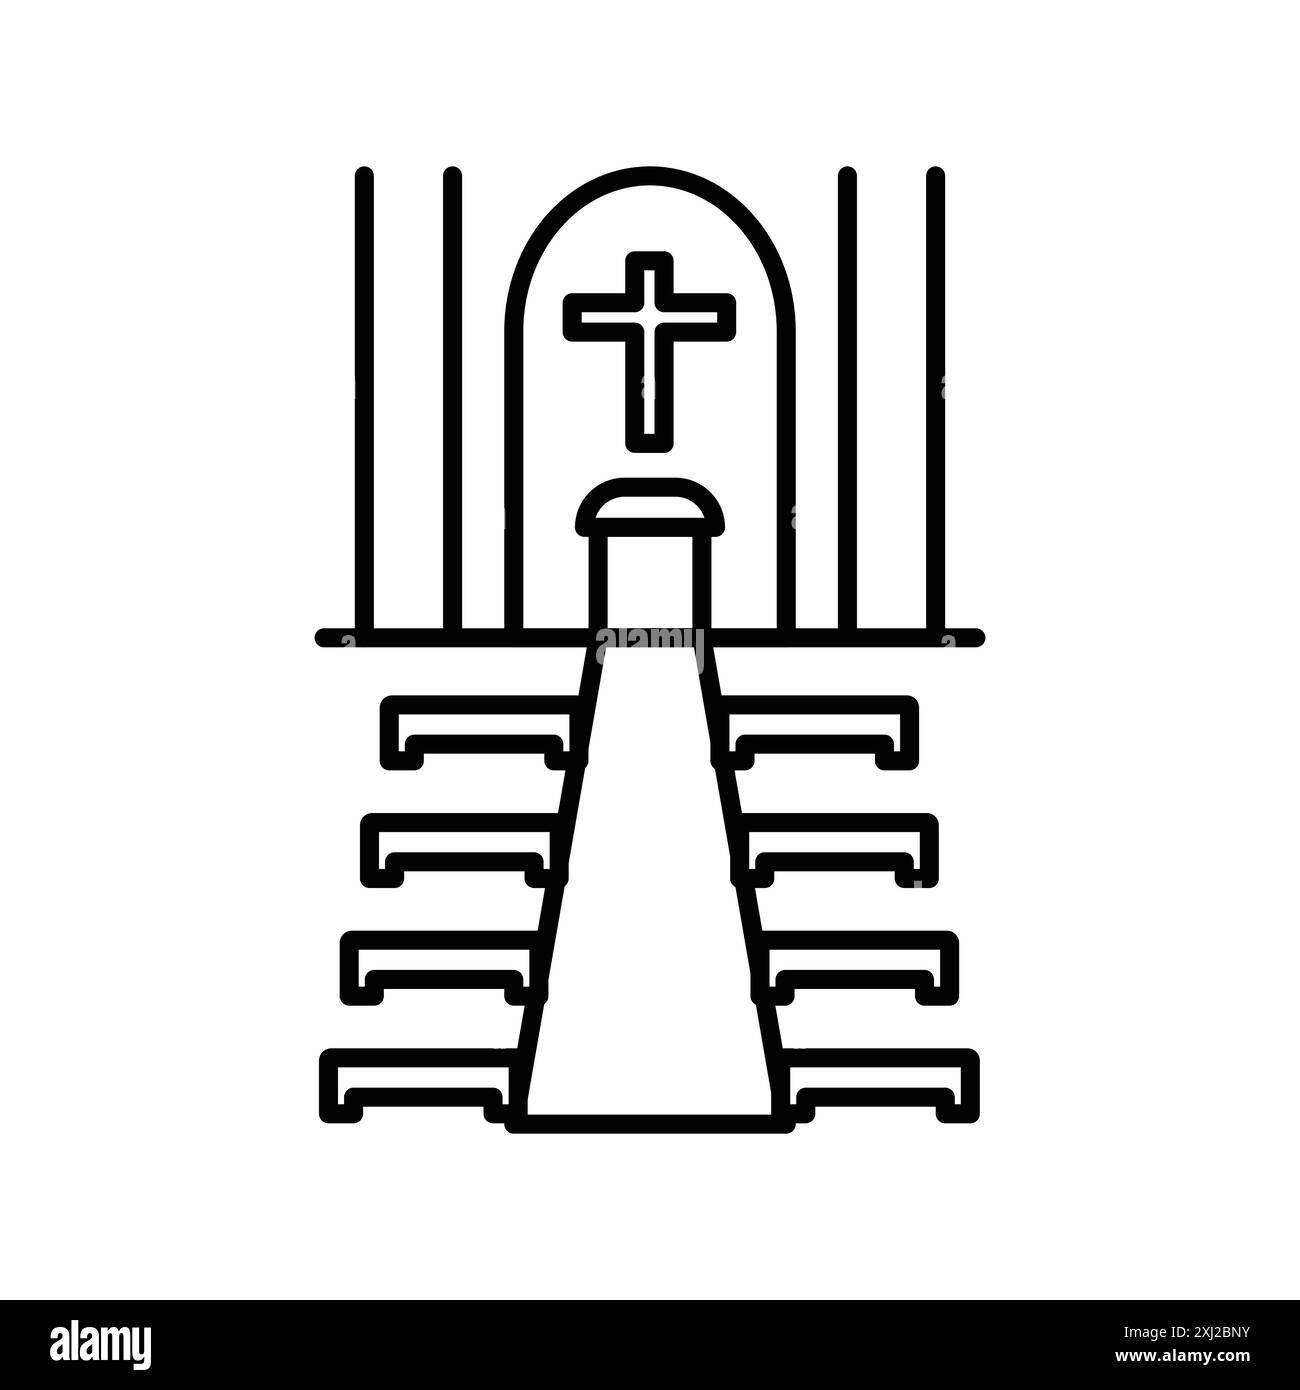 view inside catholic church icon linear logo mark set collection in black and white for web Stock Vector